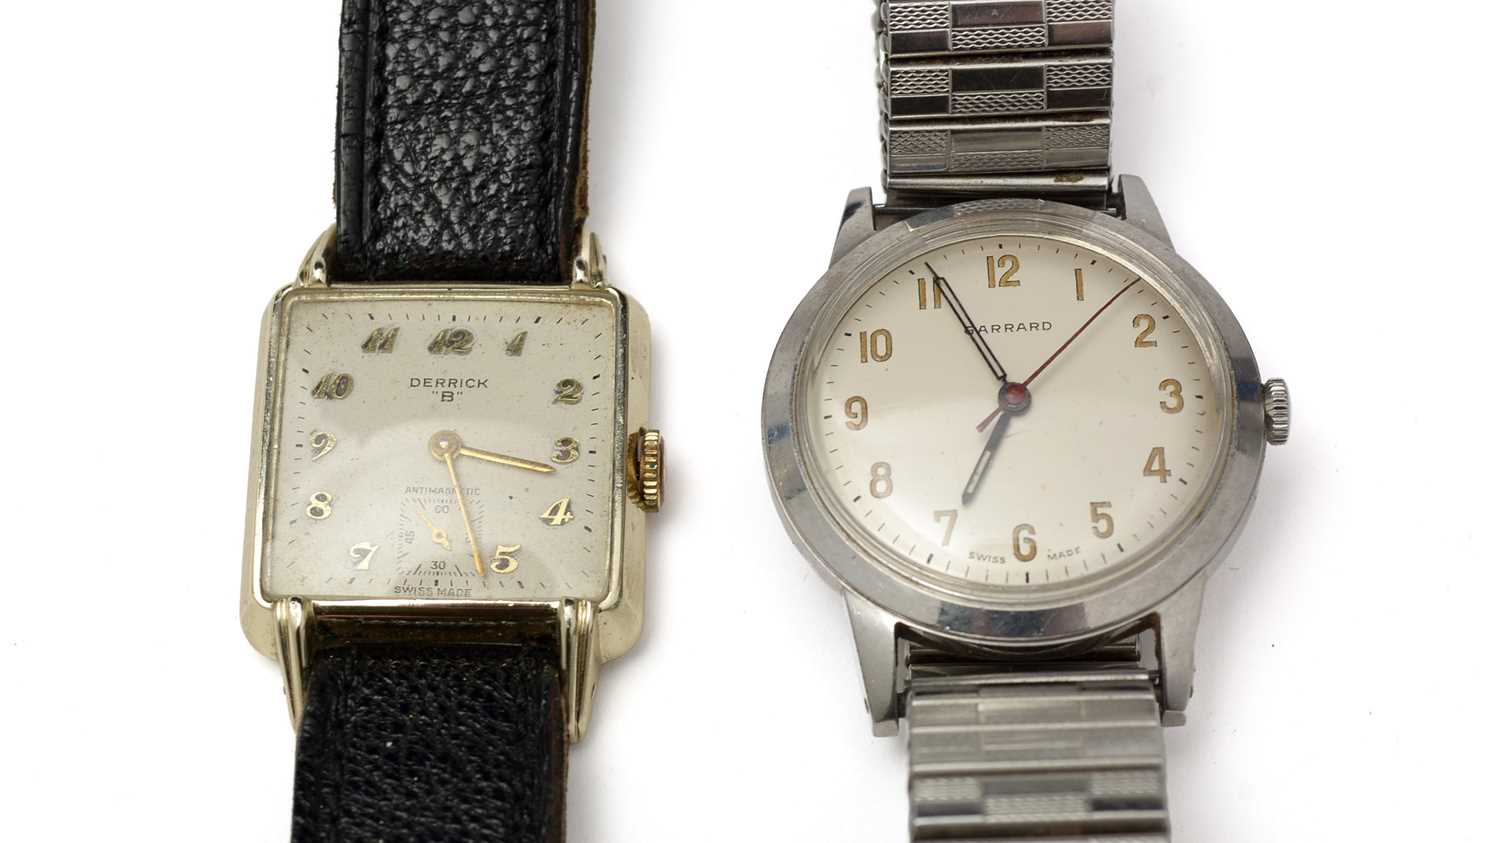 A wristwatch by Garrard and another